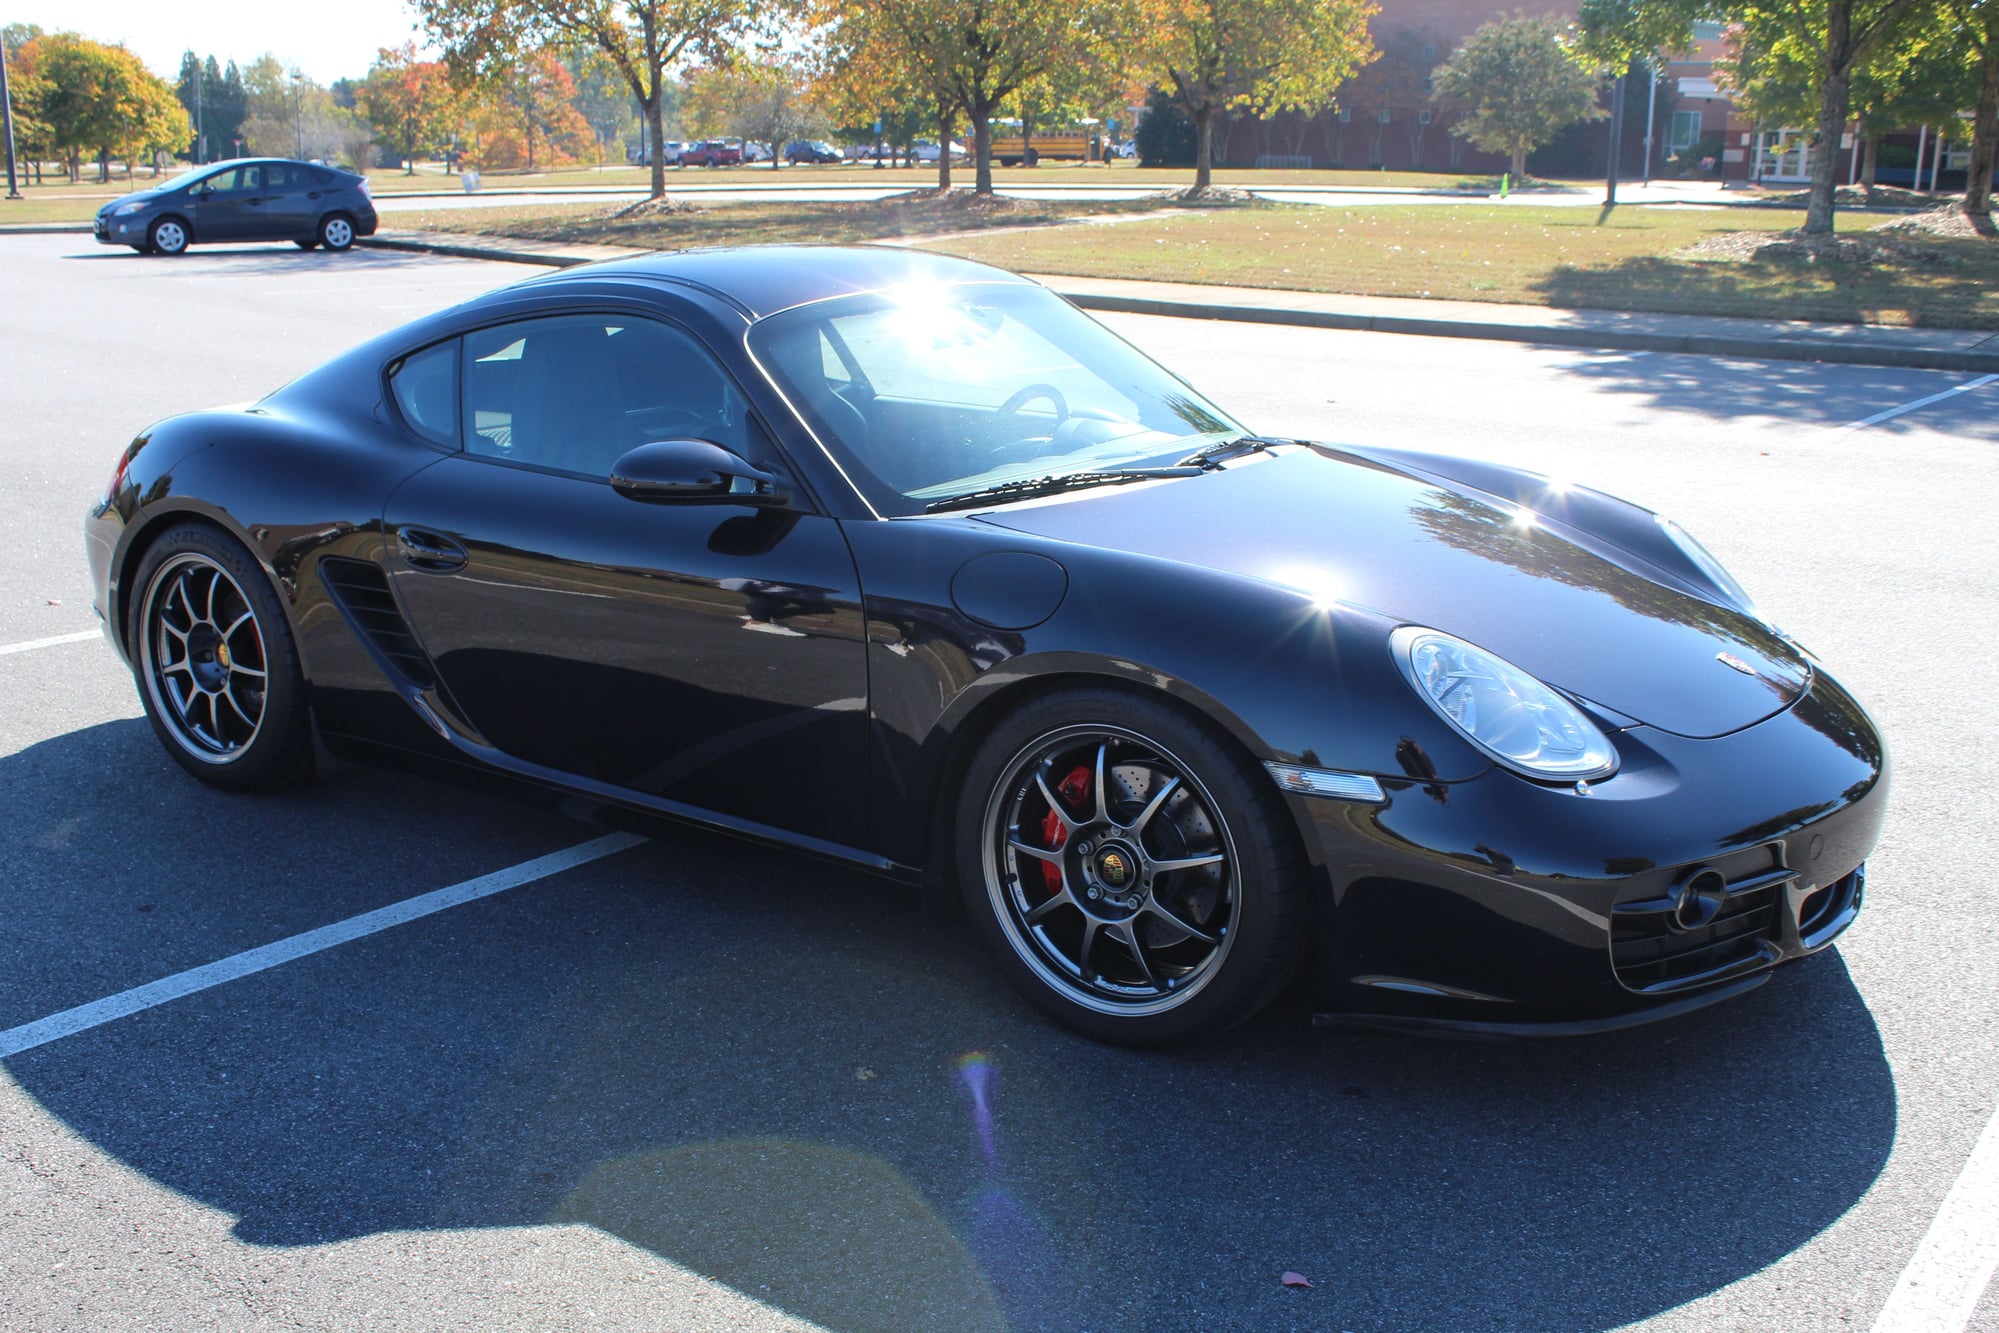 2006 Porsche Cayman - 2006 Cayman S, low miles and upgraded but never tracked! - Used - VIN WP0AB29876U780597 - 32,700 Miles - 6 cyl - 2WD - Manual - Coupe - Black - Roswell, GA 30075, United States